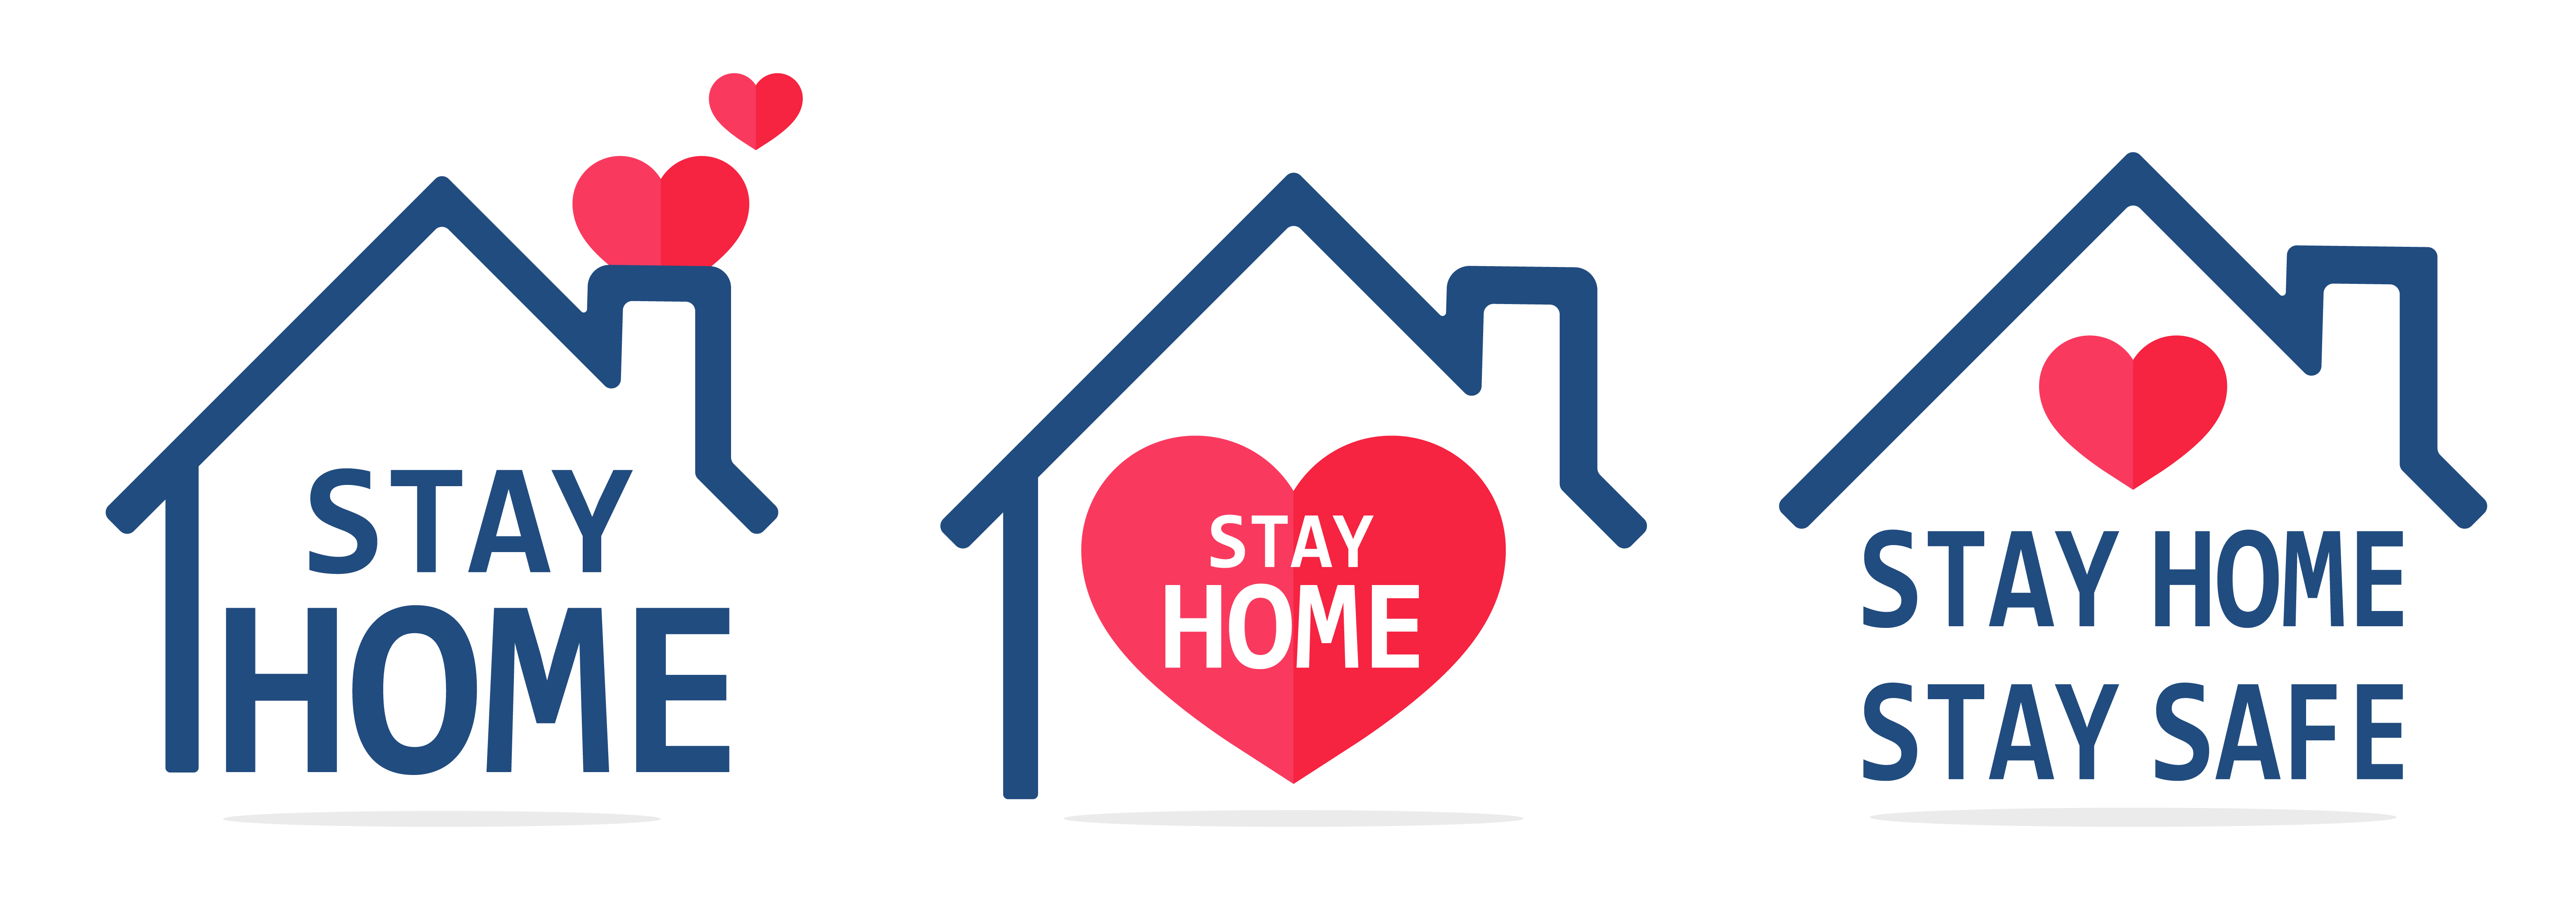 Free Svg Stay Home Stay Safe Quotes